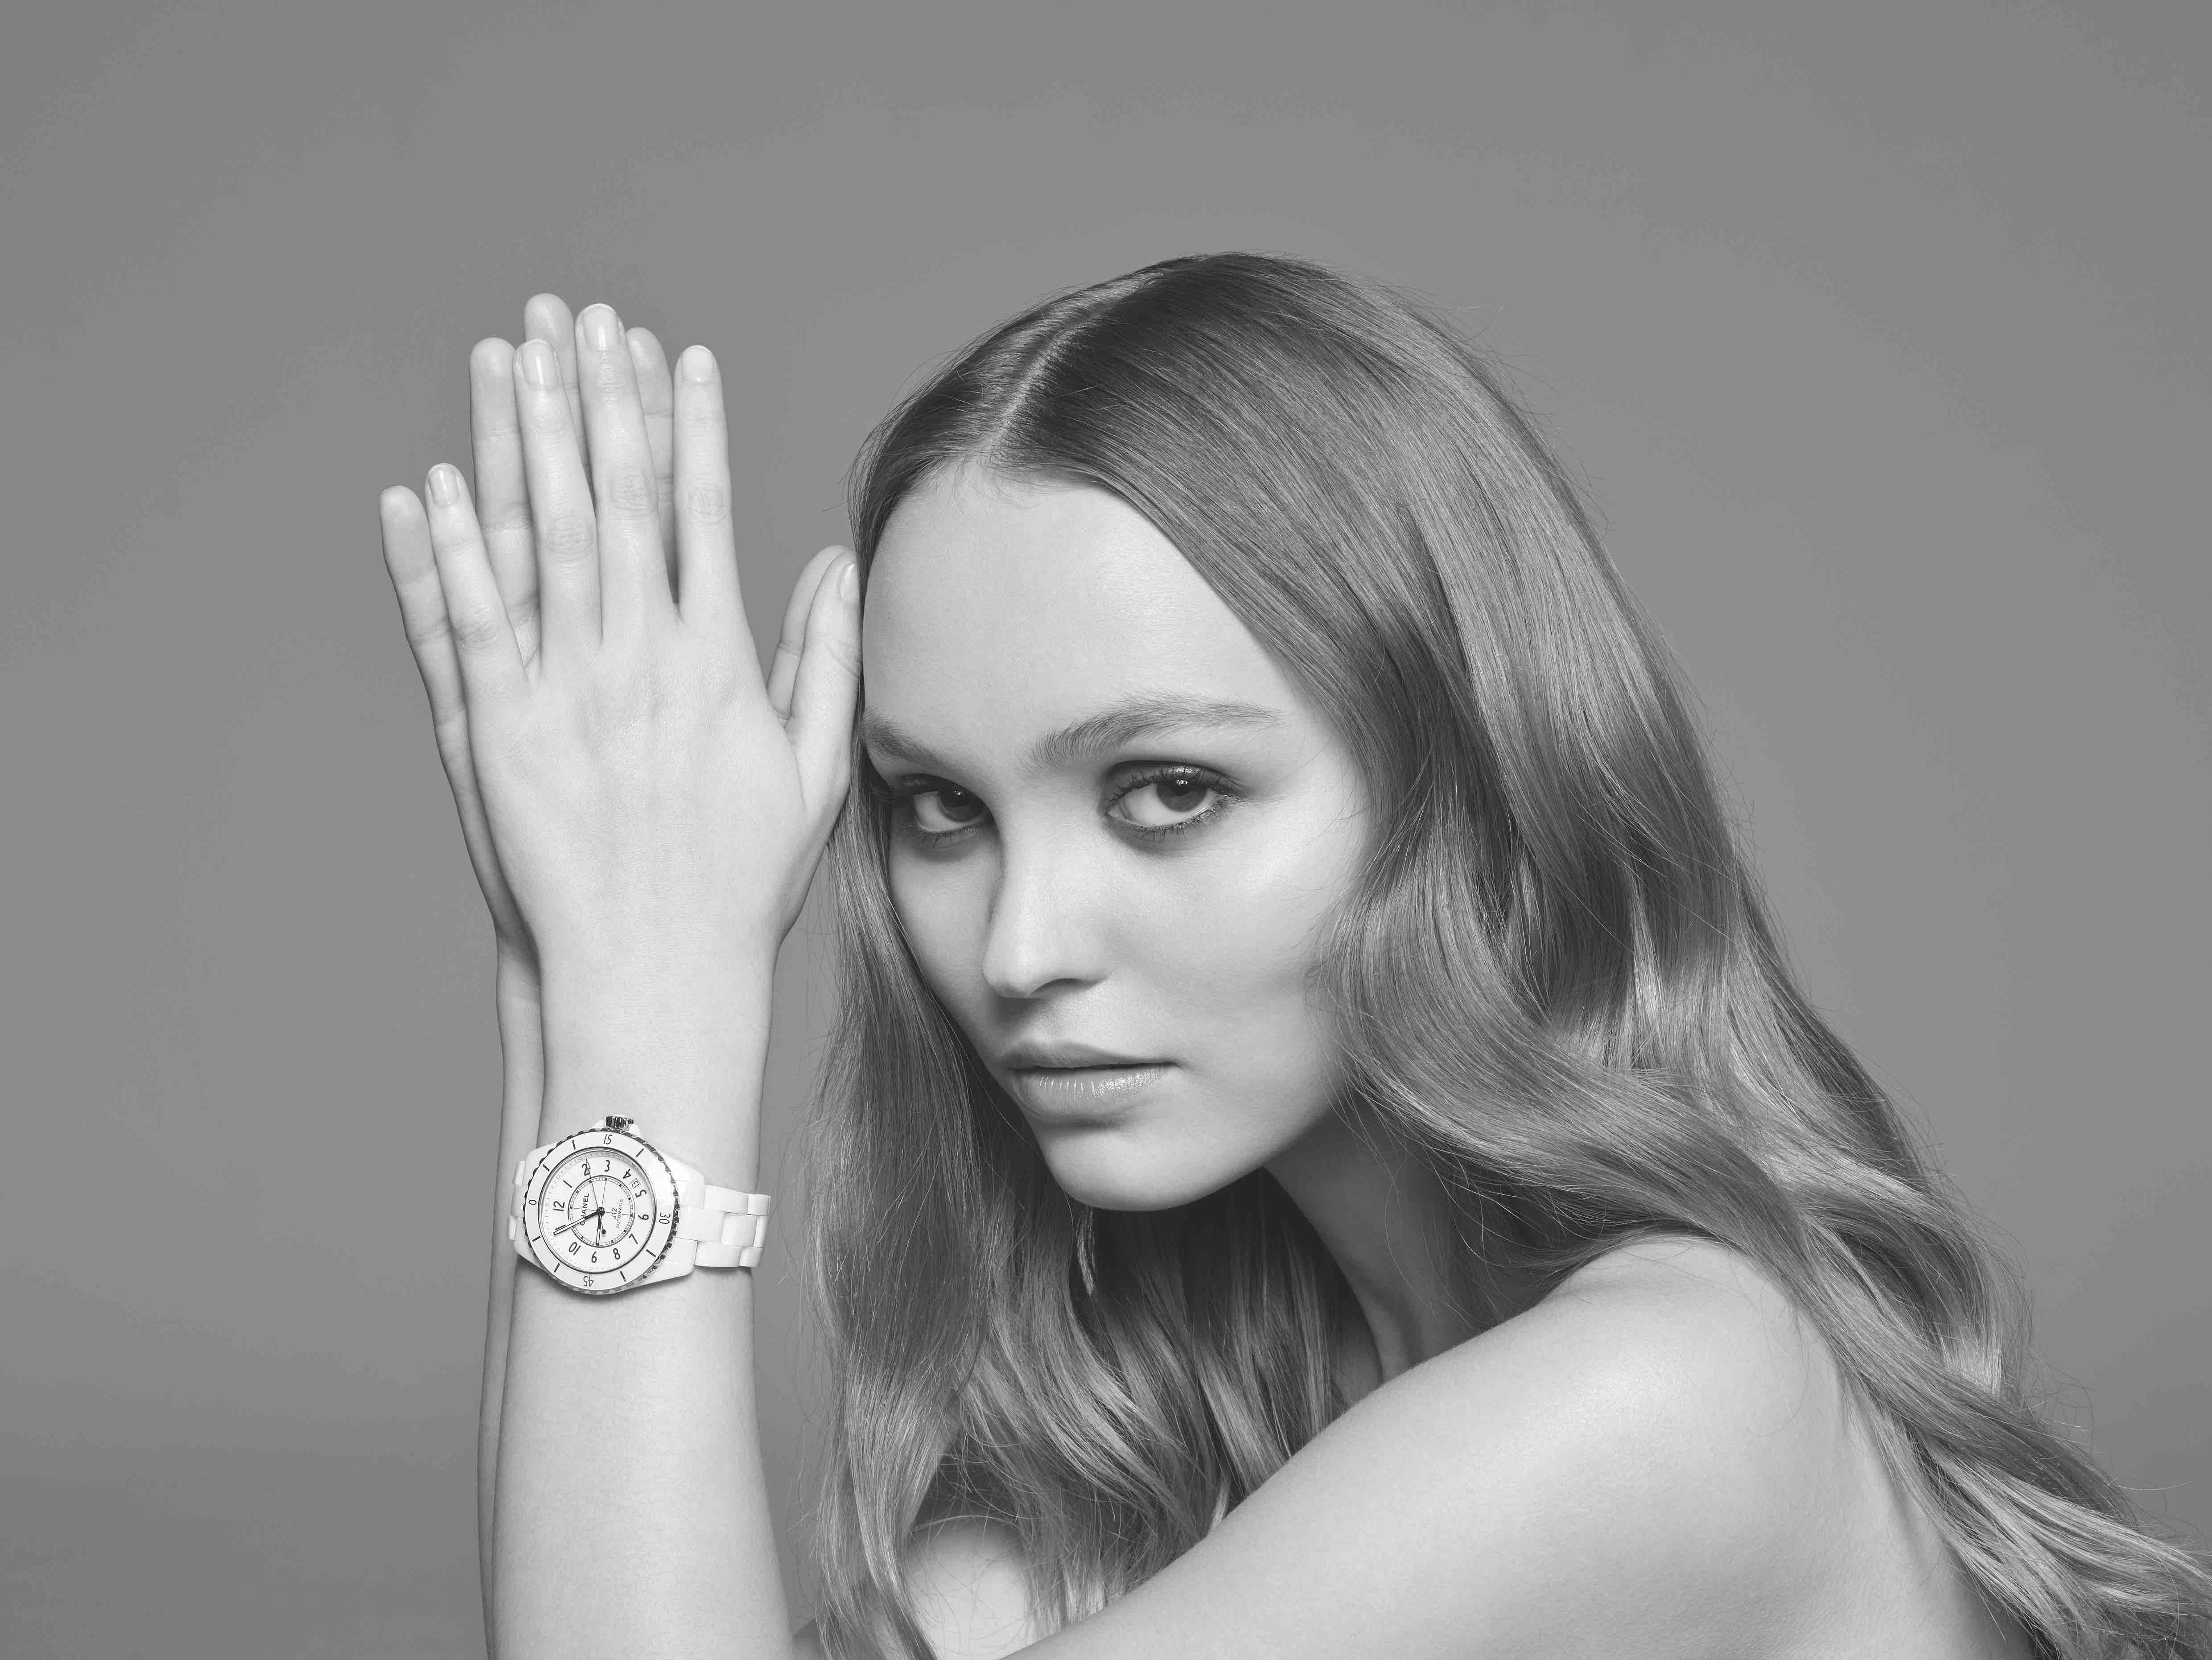 Chanel J12 Model Lily-Rose Depp On How Long A Kiss Should Last